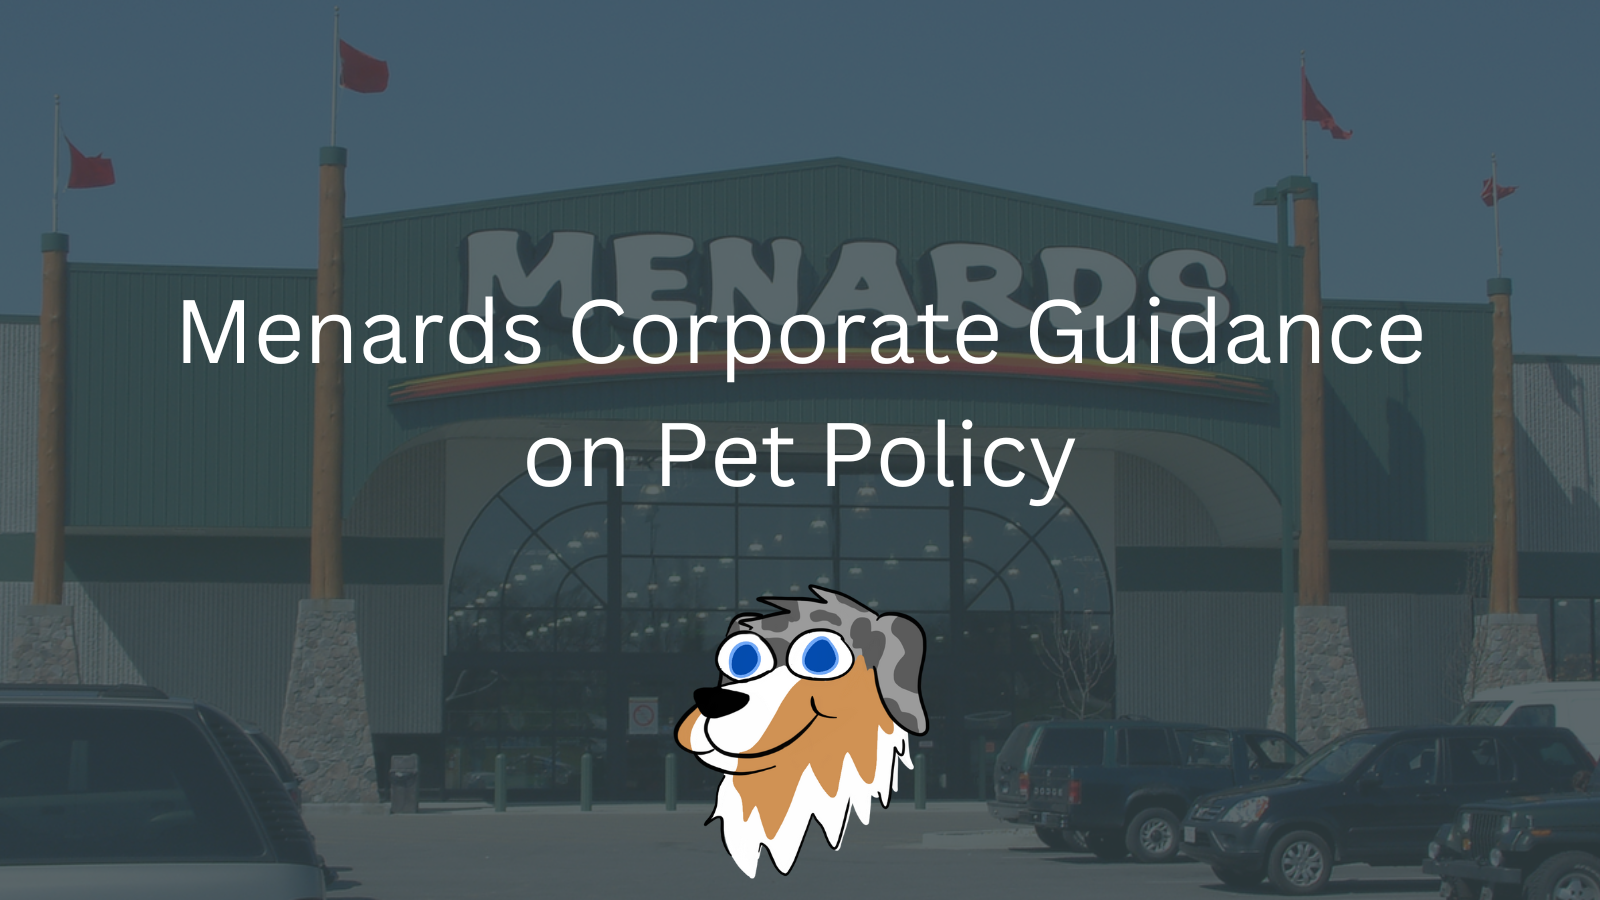 Image Text: "Menards Corporate Guidance on Pet Policy"